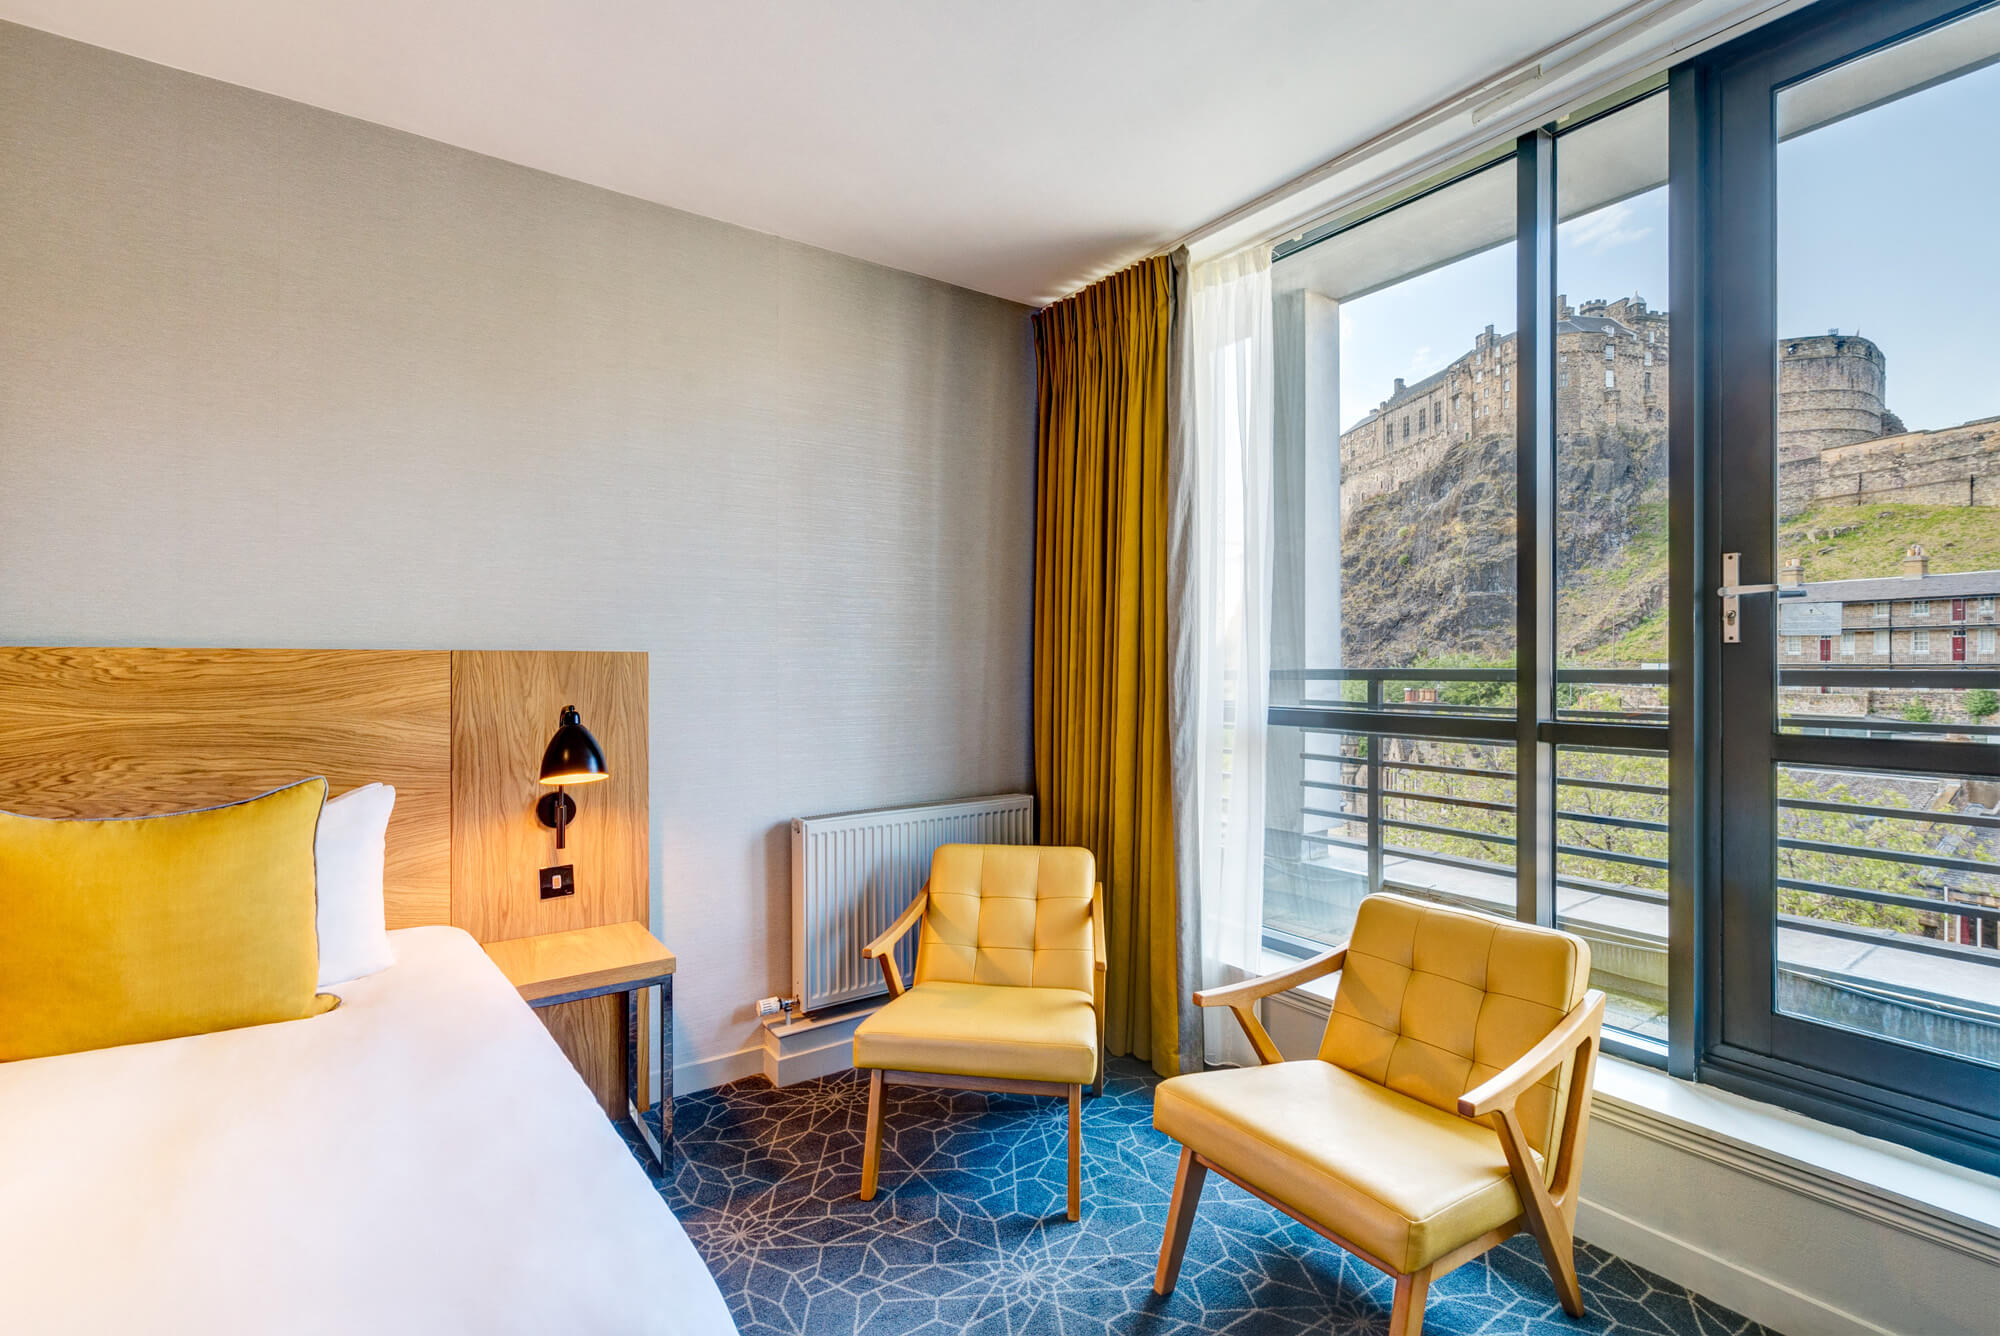 Double bed with views onto Edinburgh Castle in Apex Grassmarket's Deluxe Castle View Room